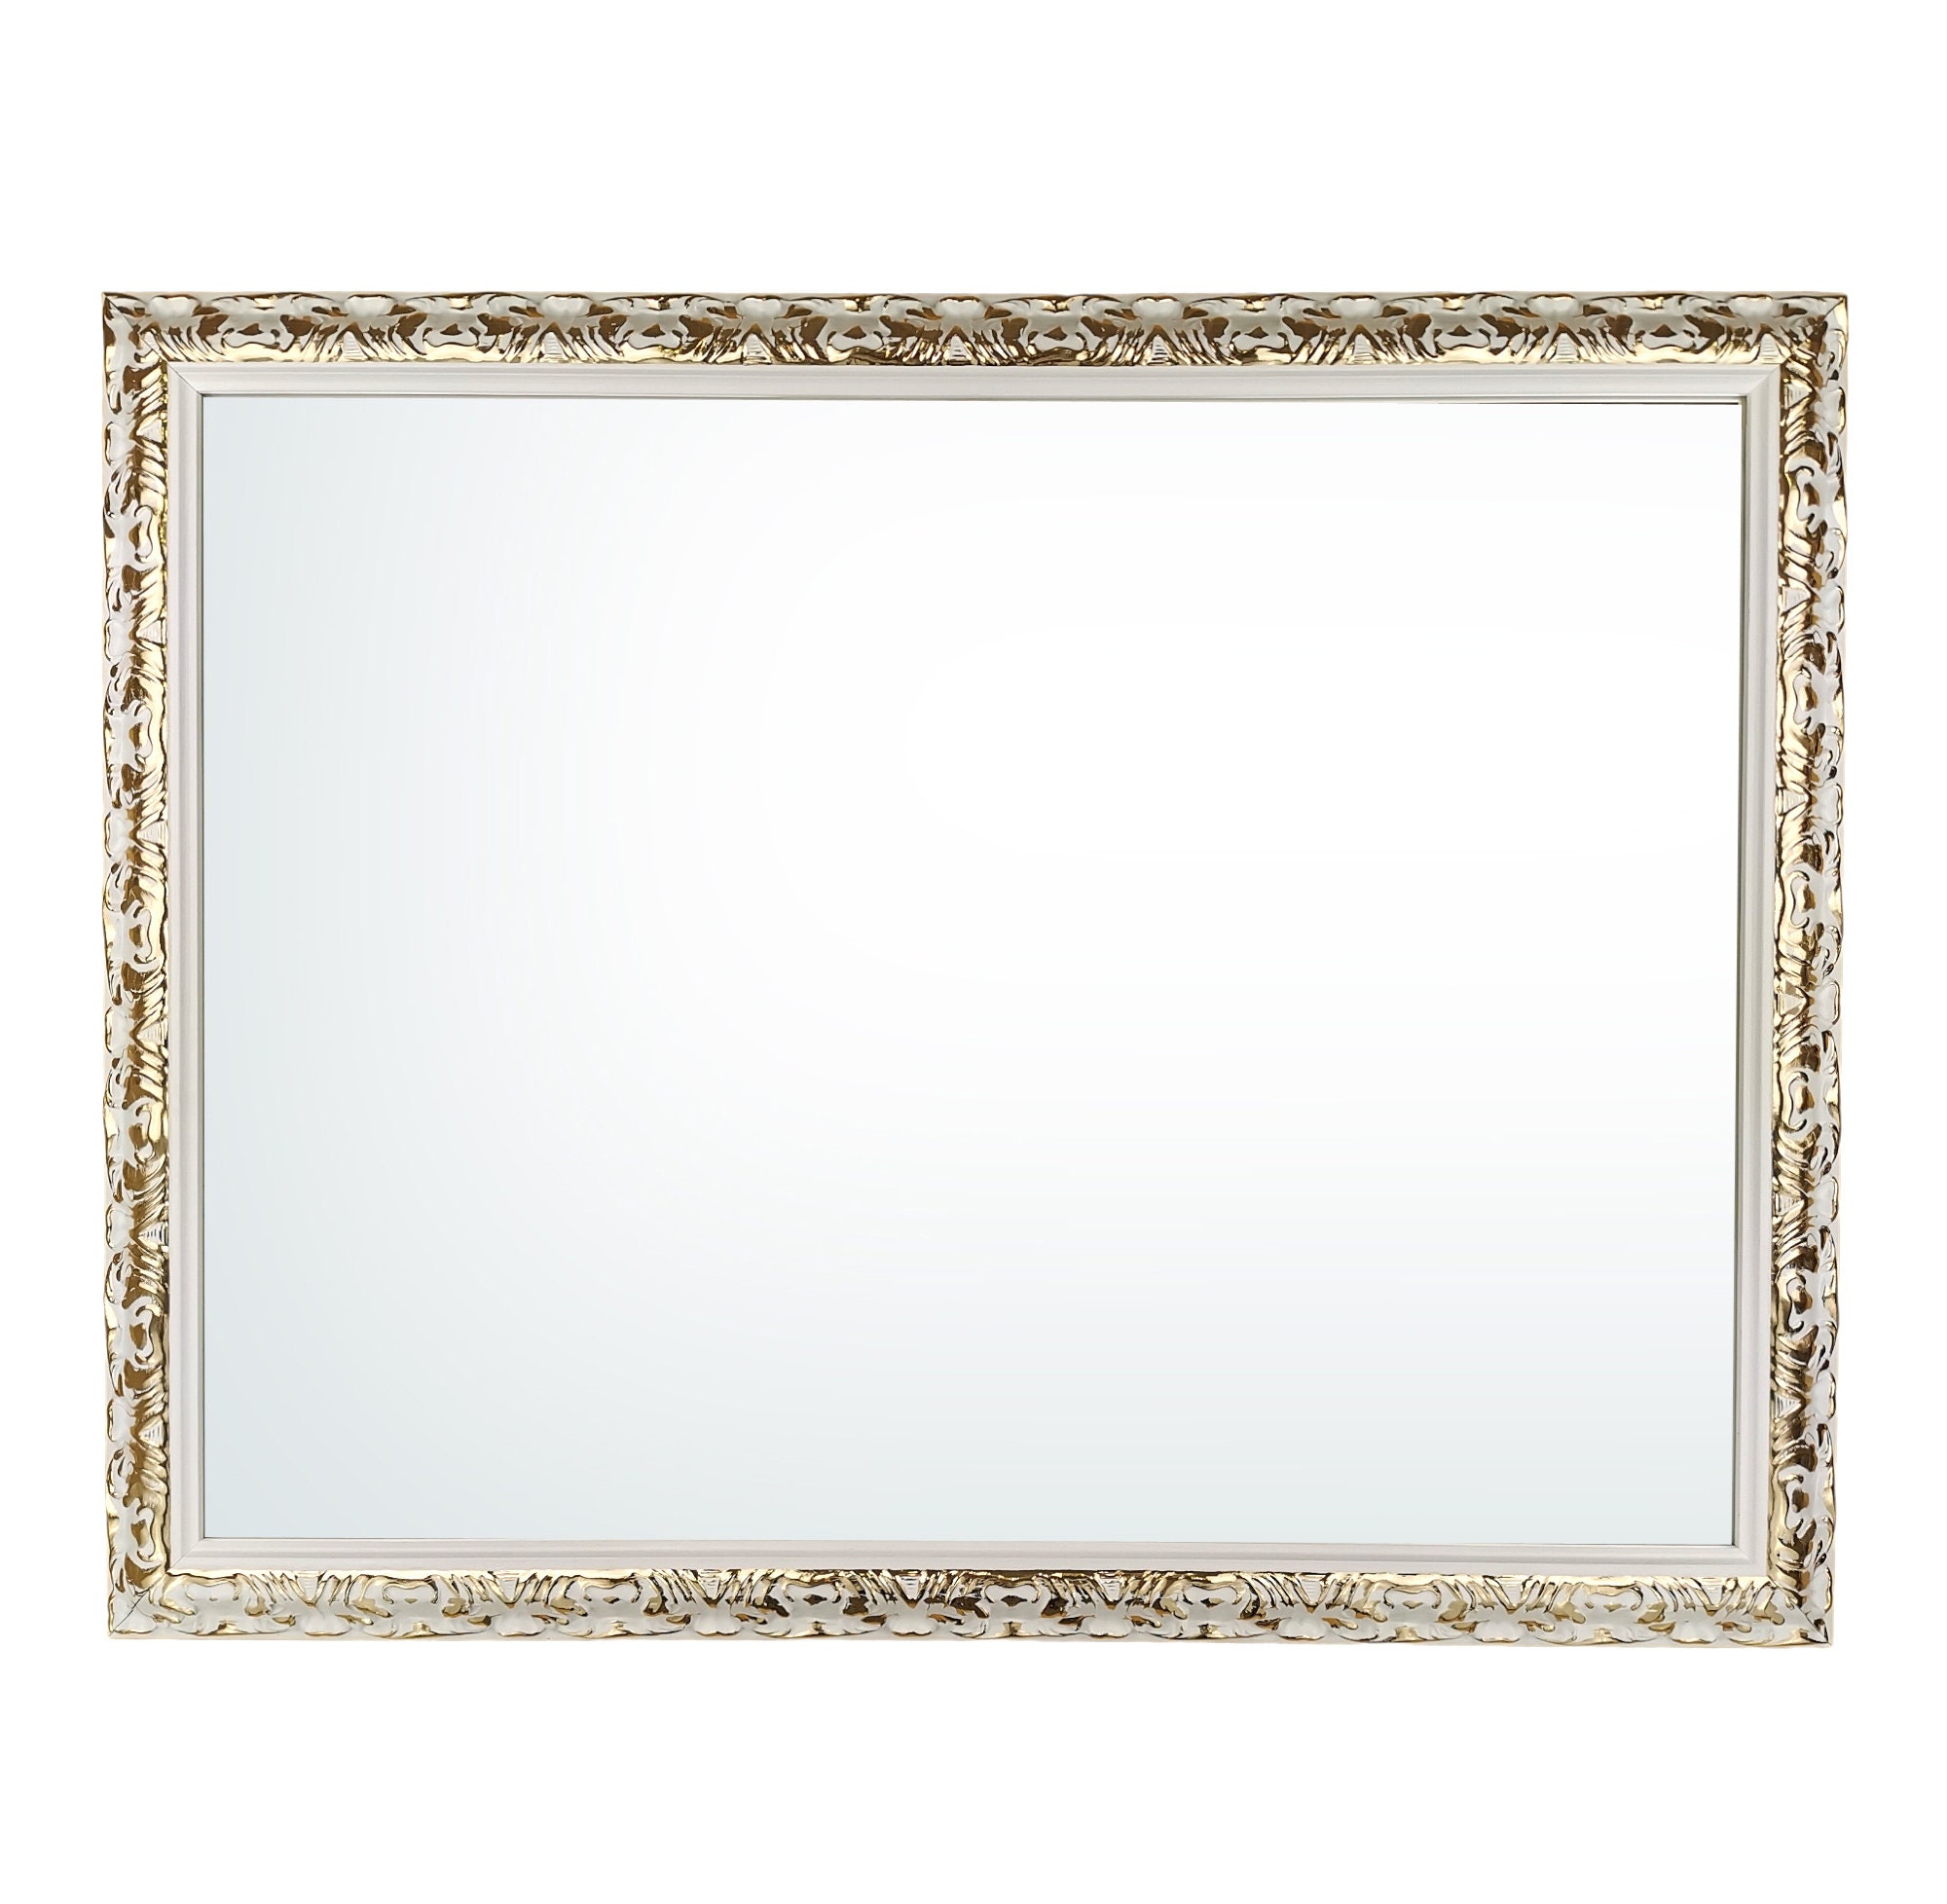 ITALIA CORNICI Master Craftsmen Classic Rectangular Polished White Gold  Wall Mirror 90 X 70 Cm external Dimensions Made in Italy 